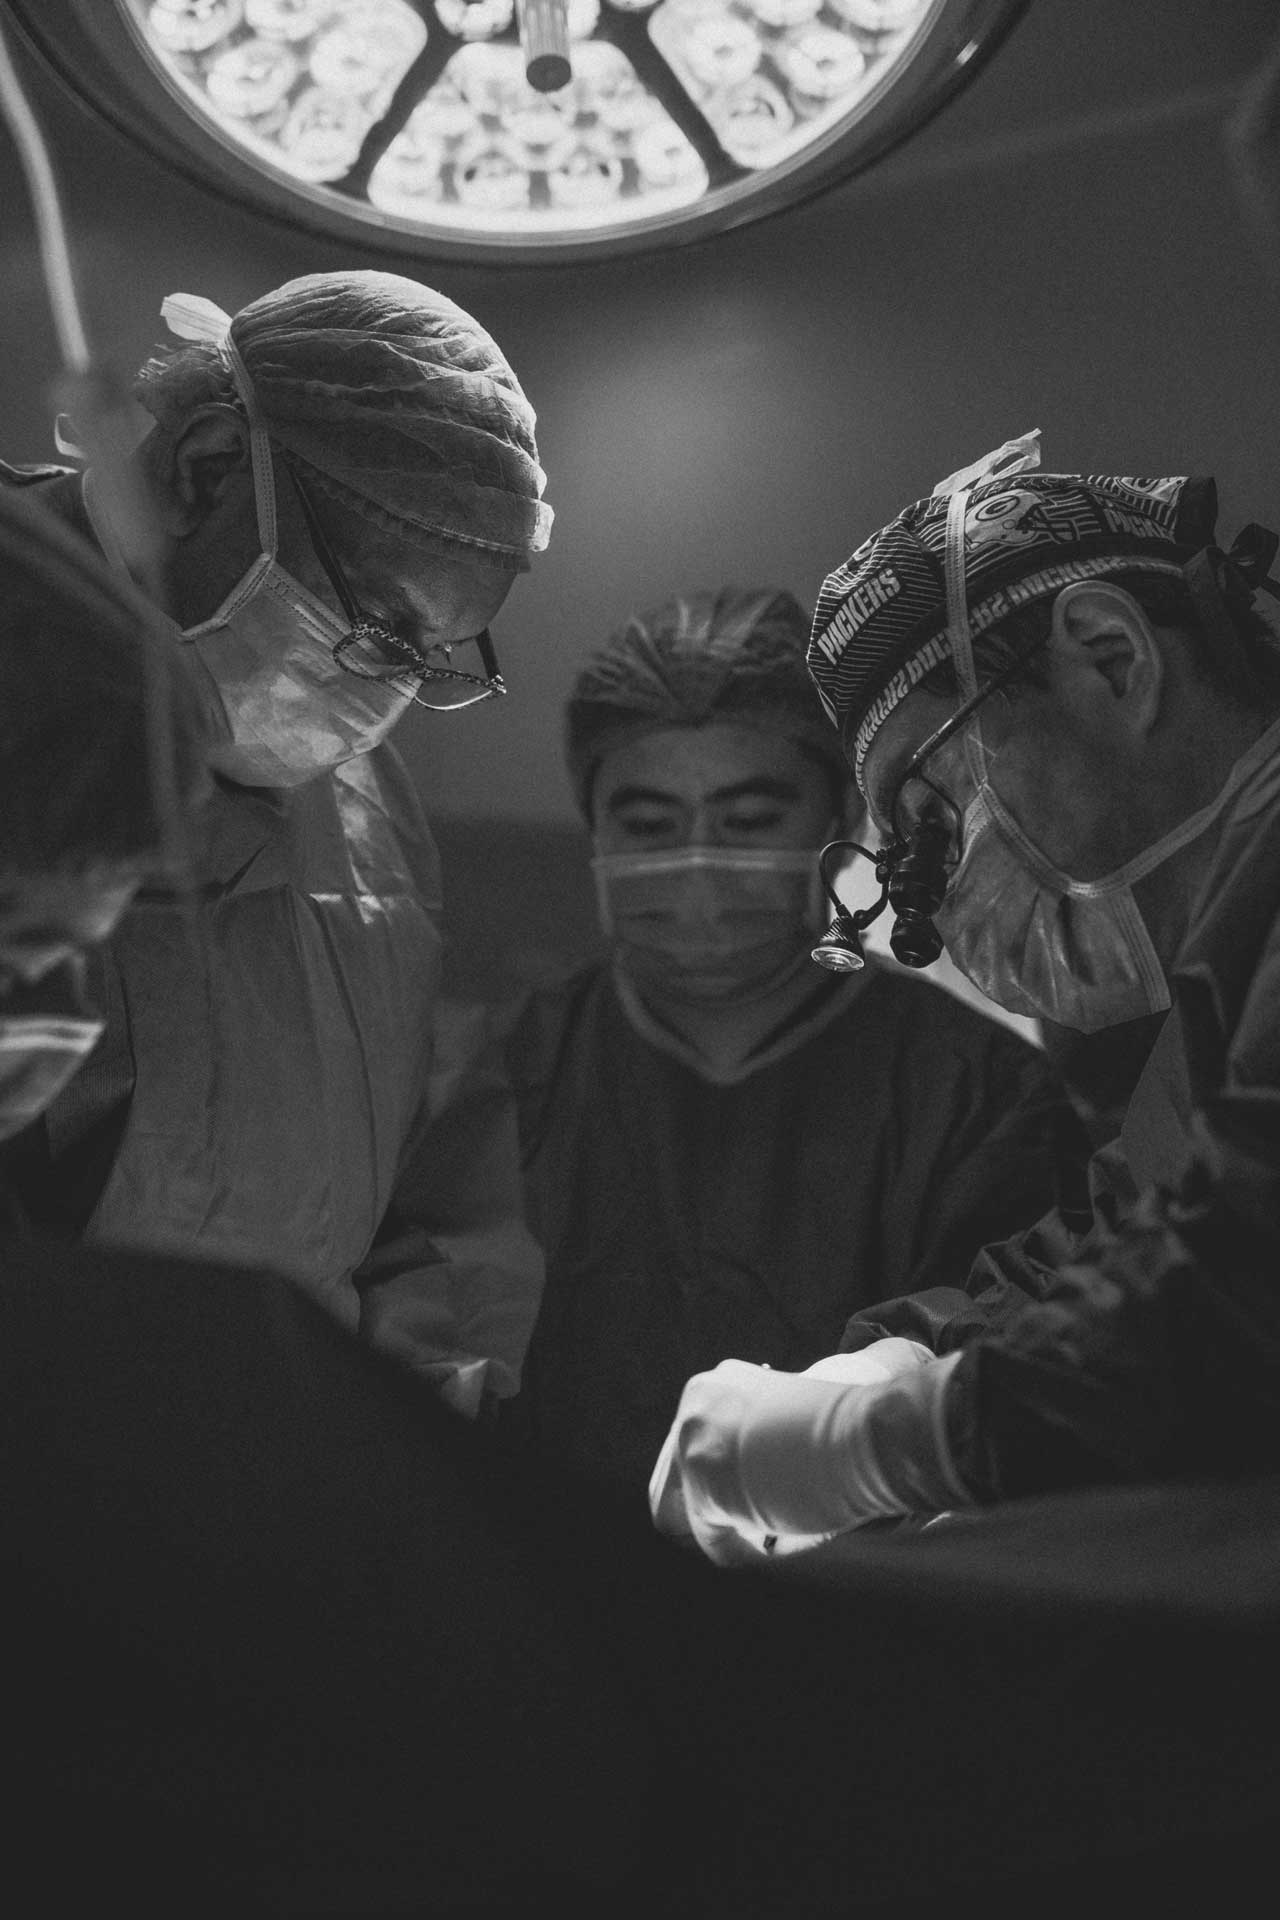 Black And White Image Of Surgeons Performing A Surgery